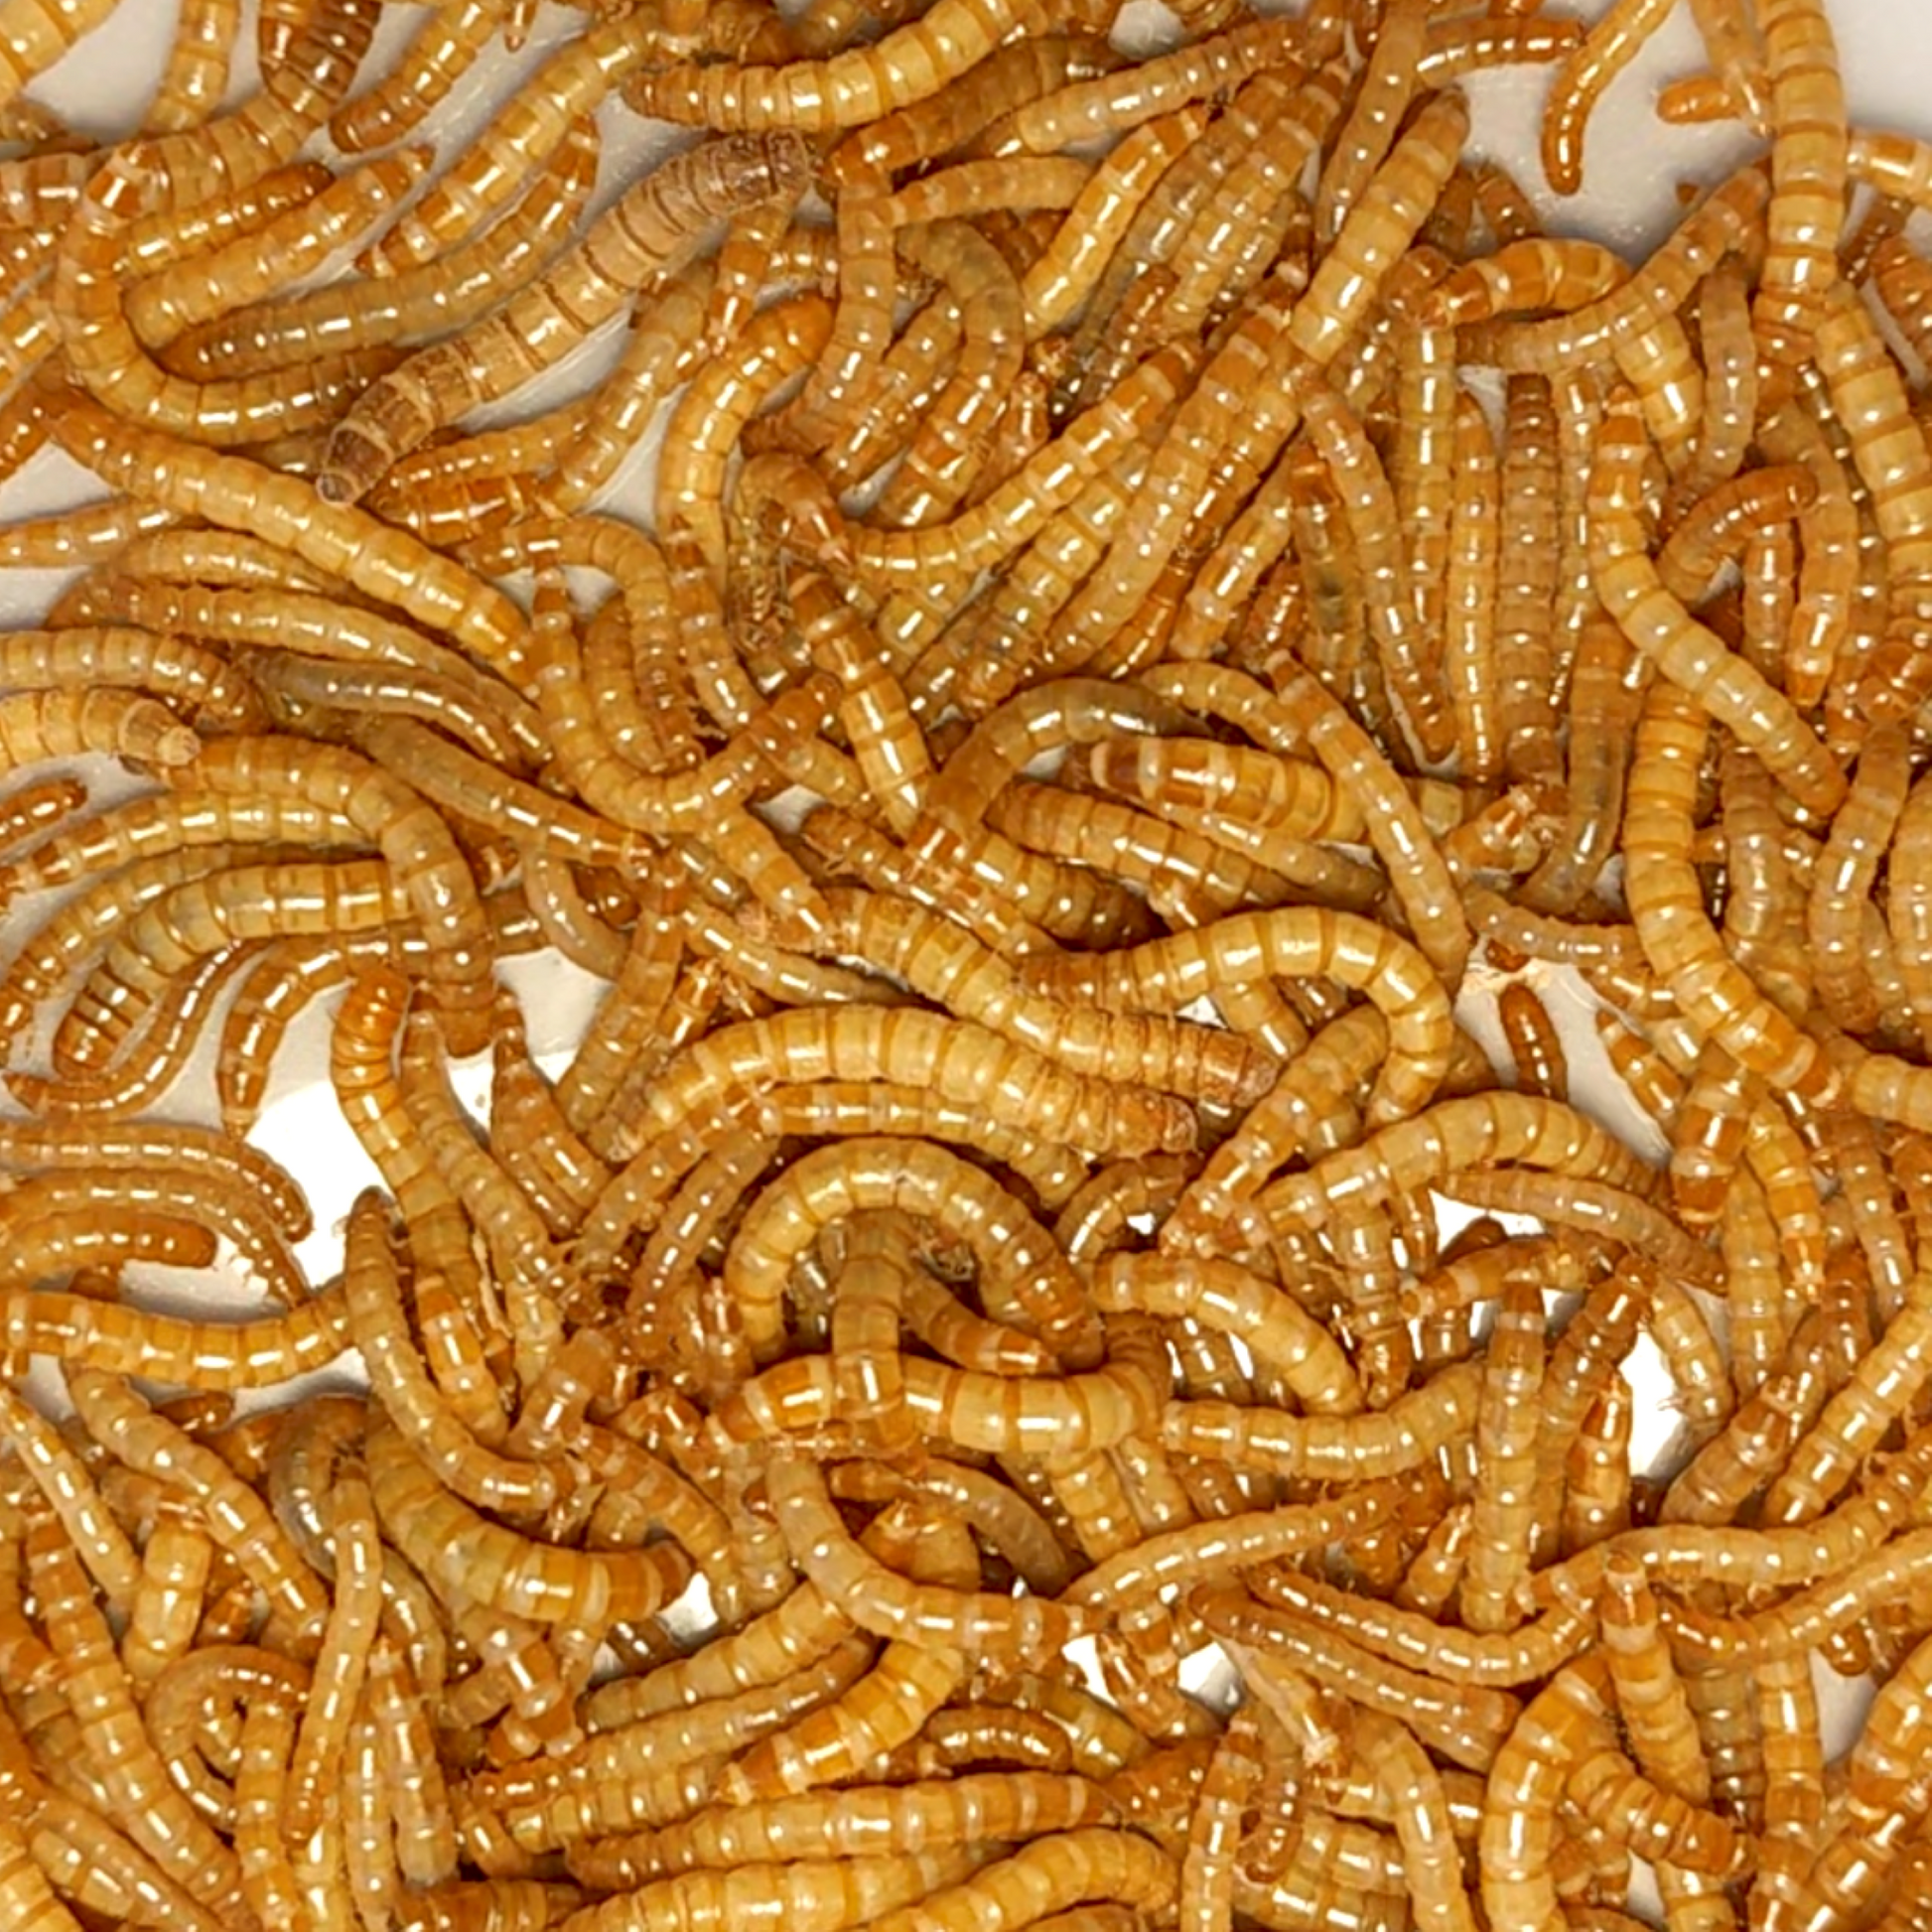 Close-up of large mealworms.